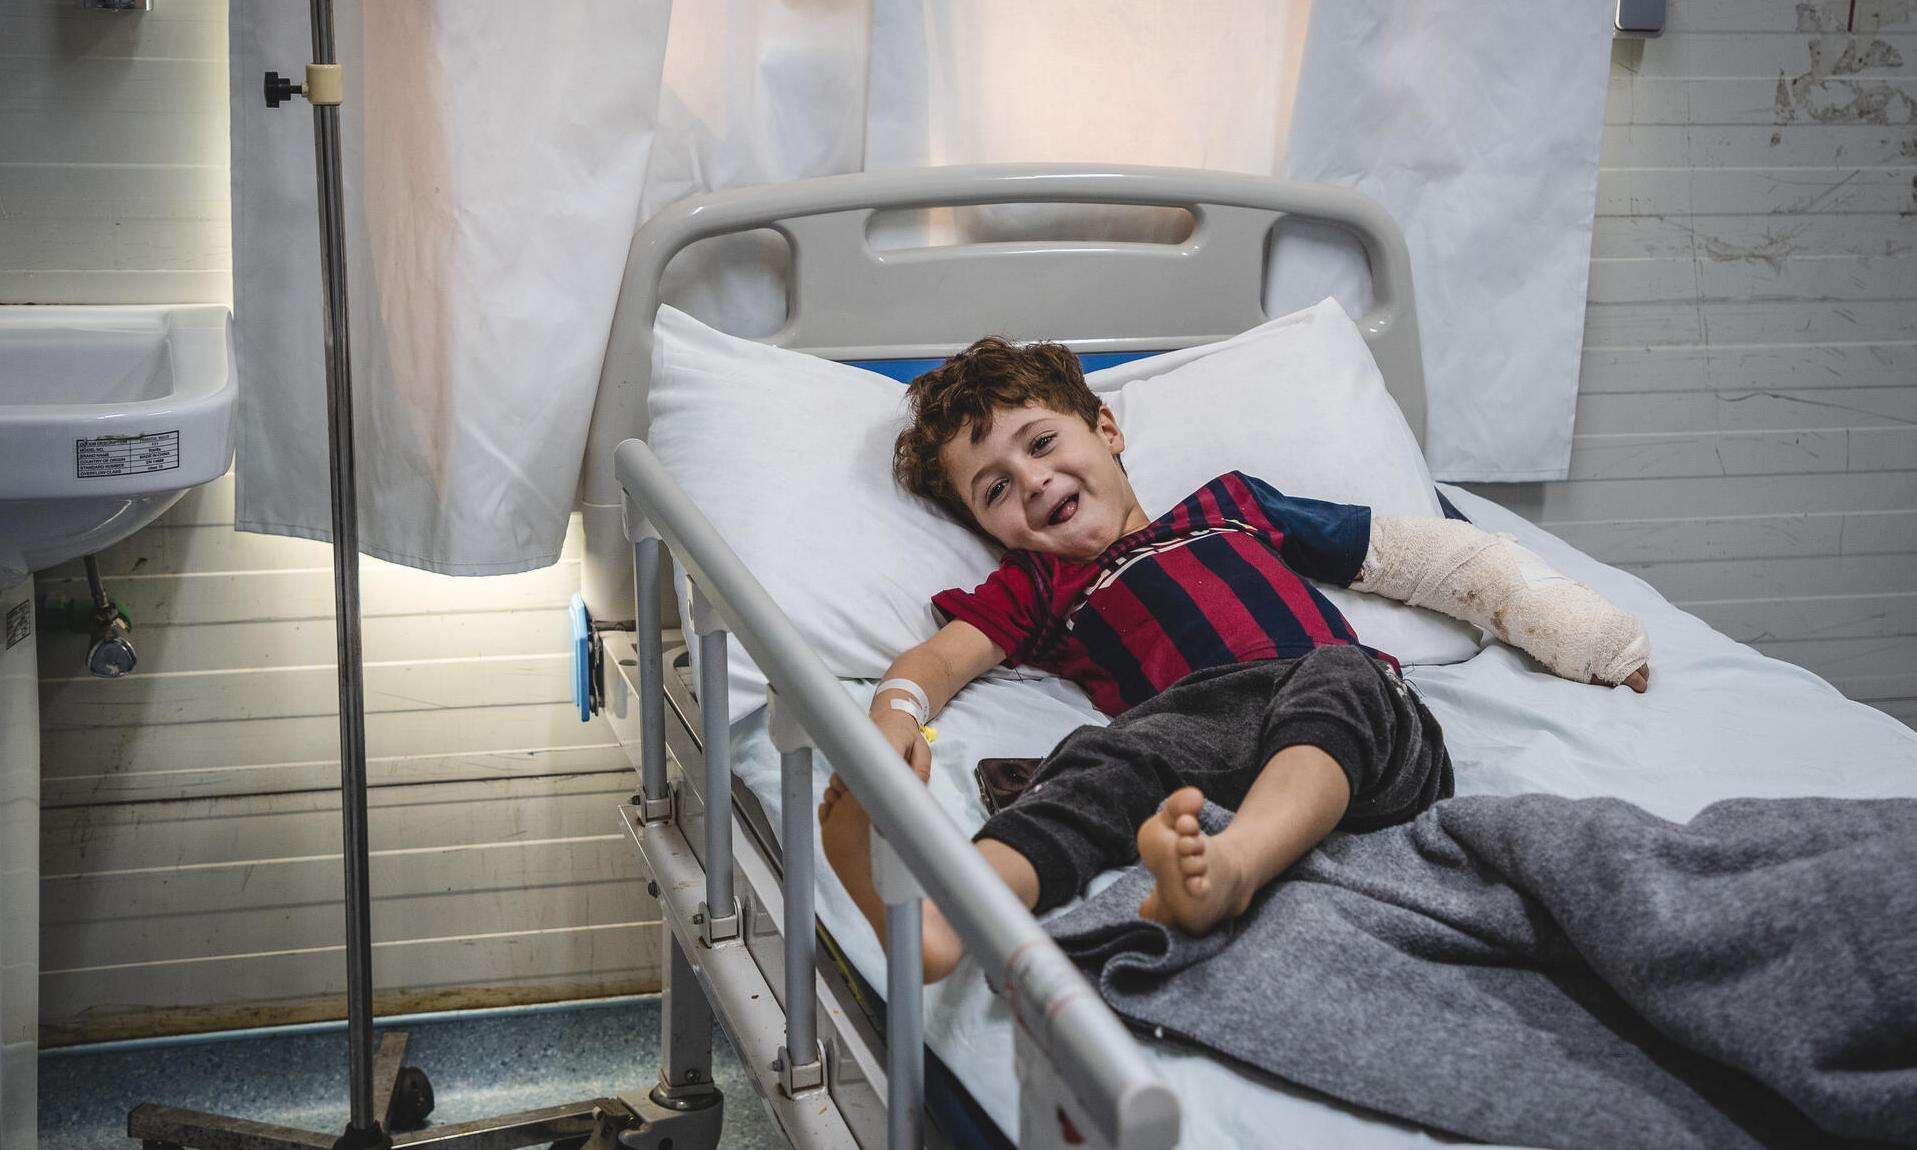 A smiling boy with an arm cast on a hospital bed in Mosul, Iraq.